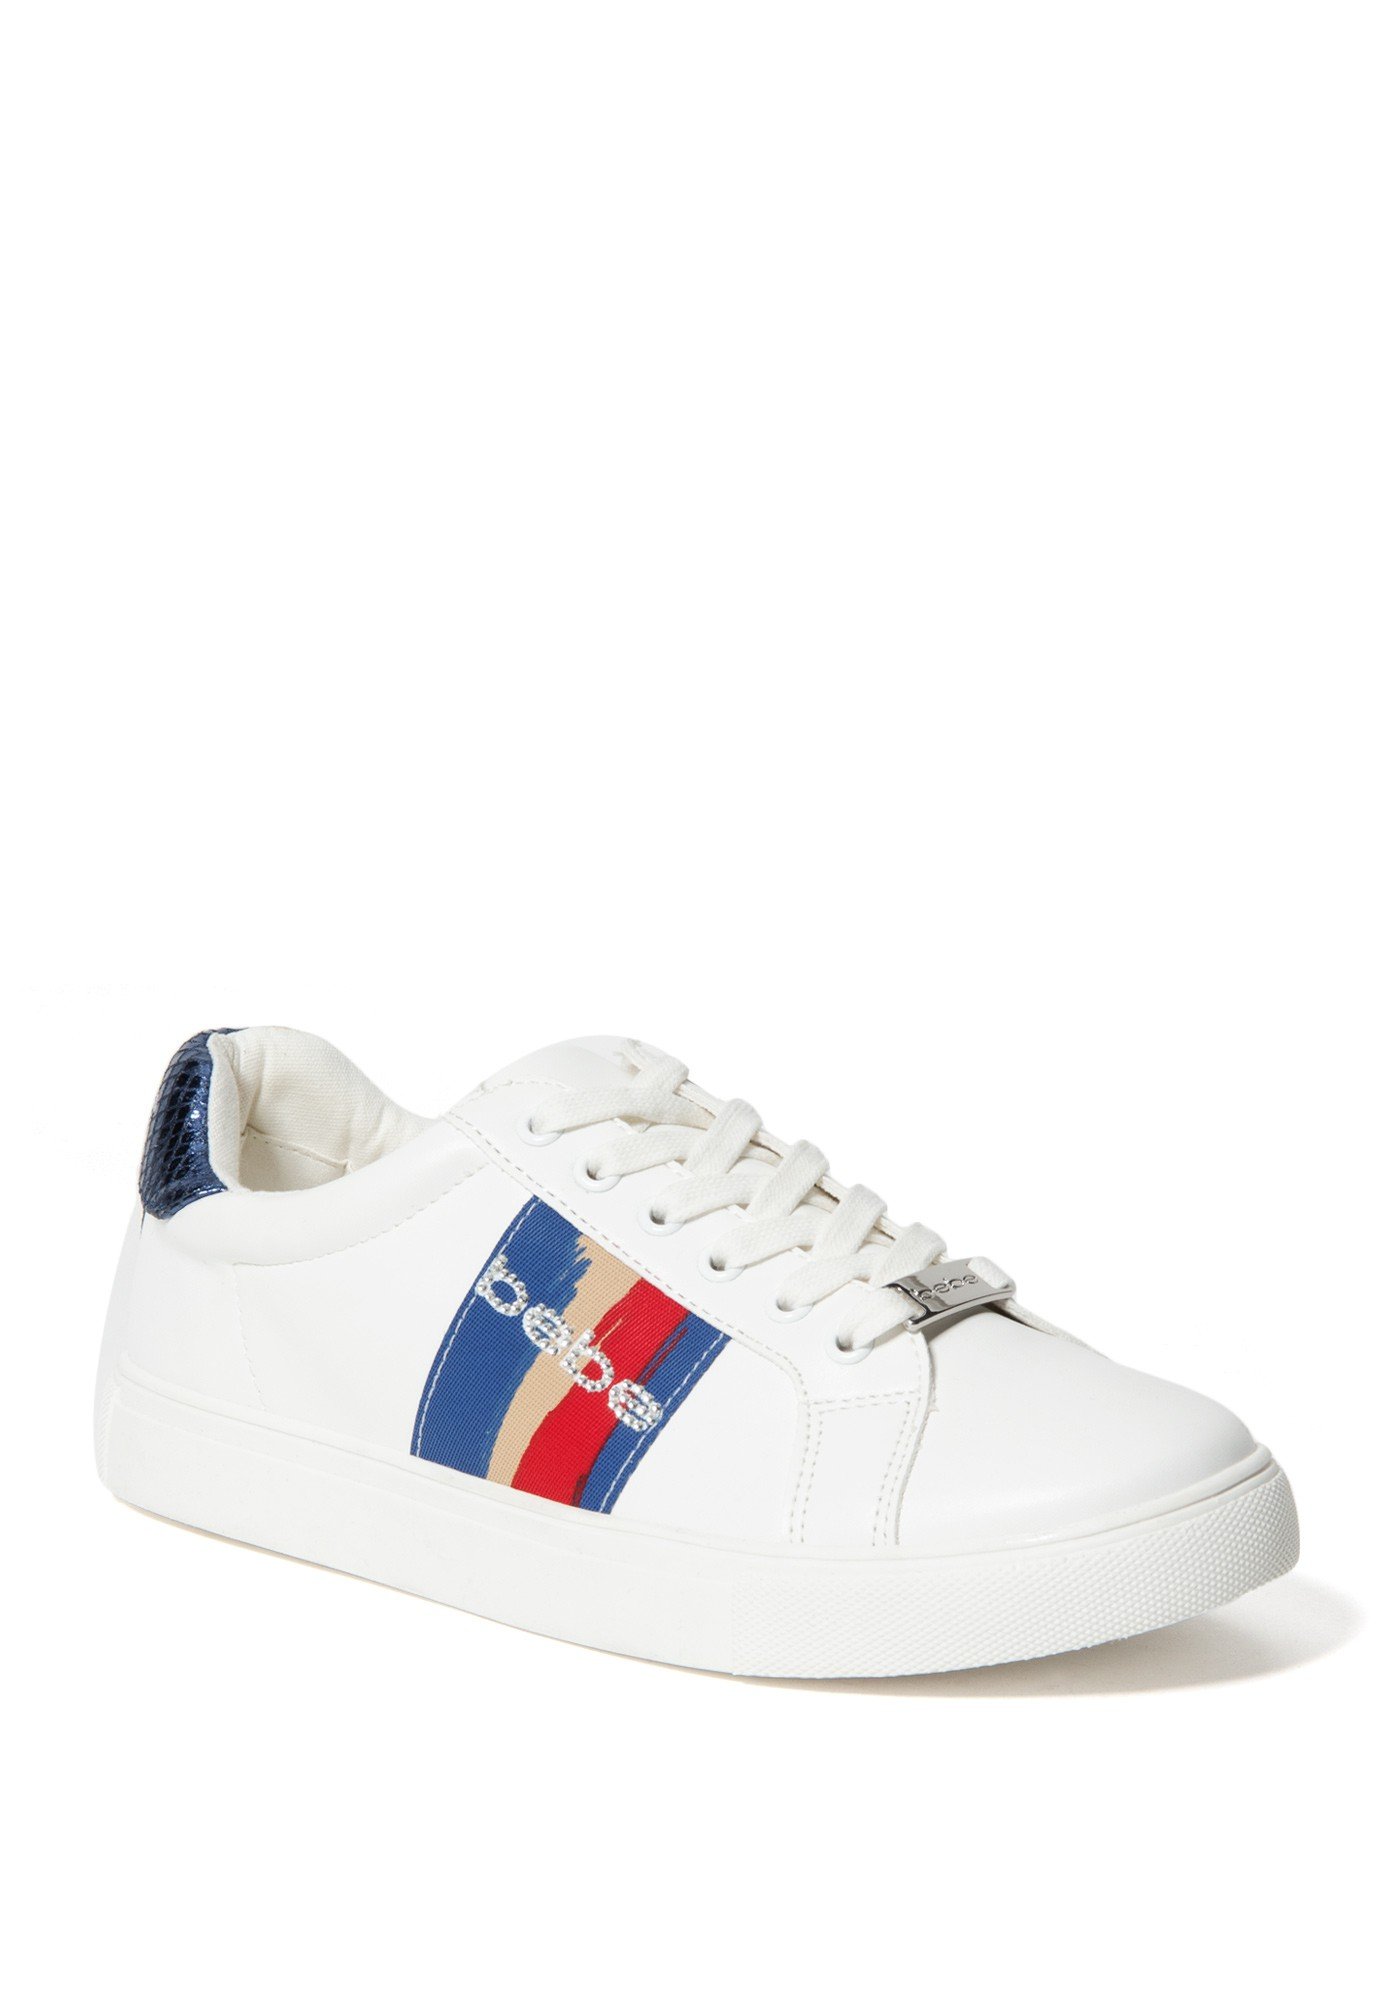 Bebe Women's Coley Logo Sneakers, Size 7 in White/Blue Synthetic